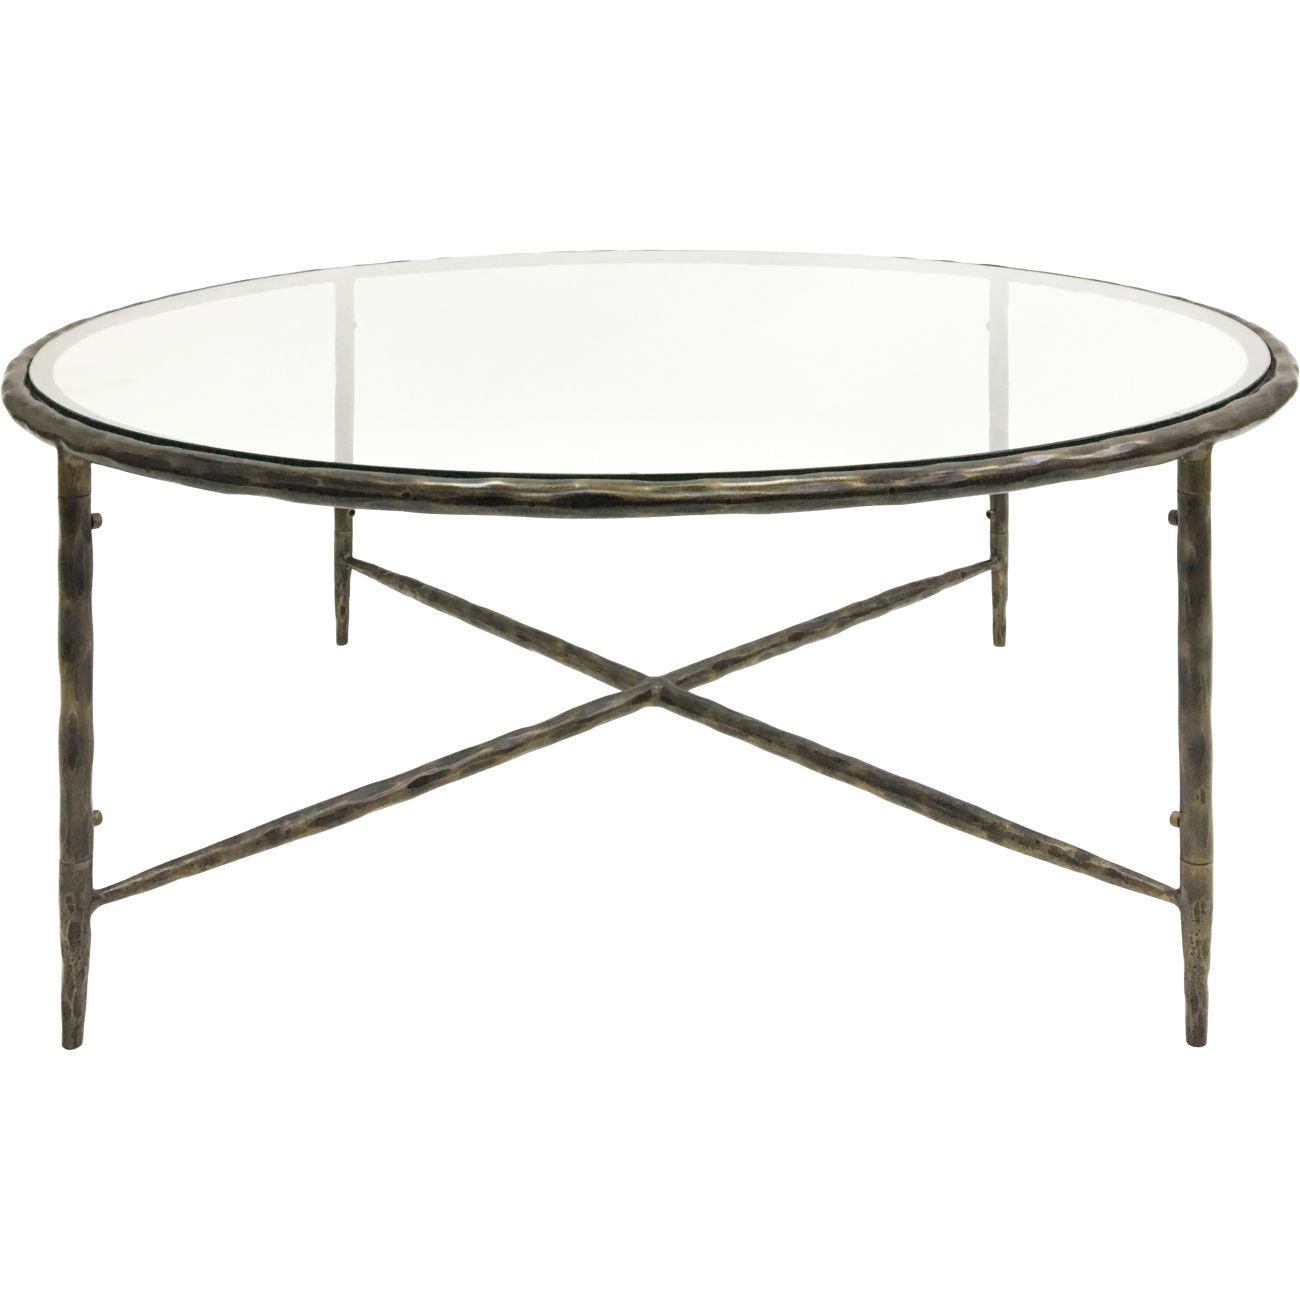 Patterdale Hand Forged Round Coffee Table